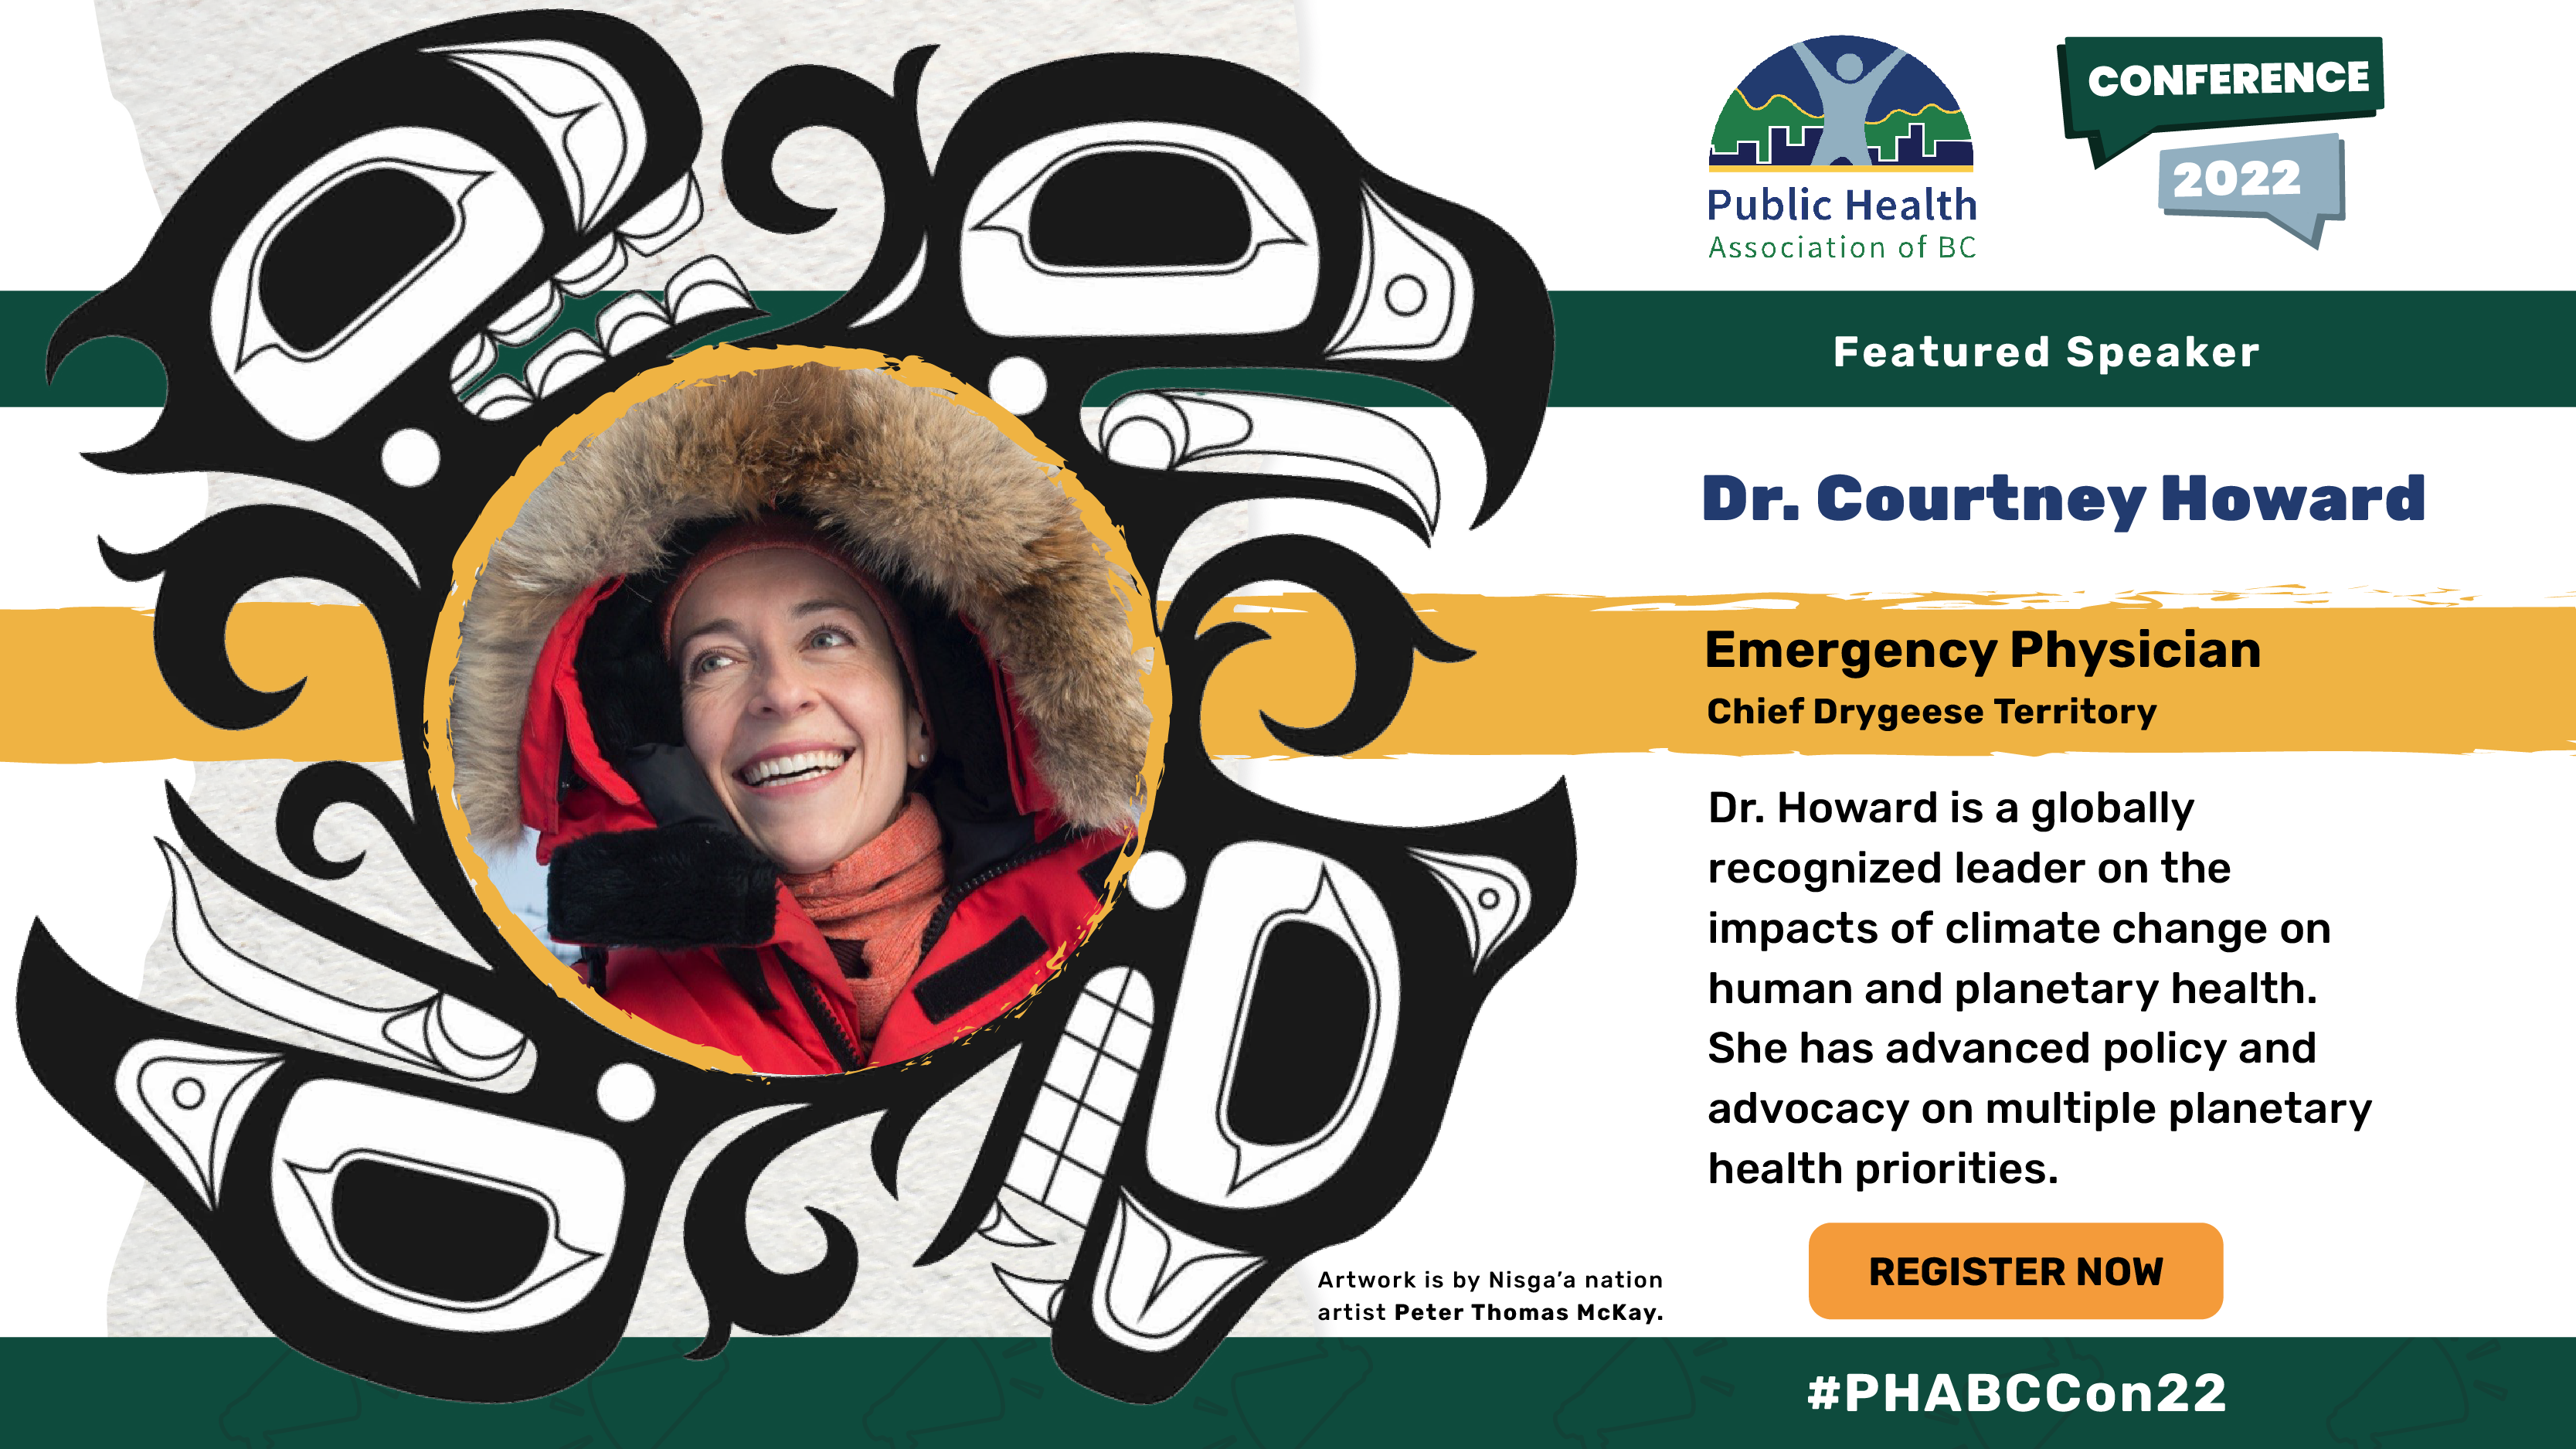 Dr. Courtney Howard. Emergency physician. Chief Drygeese Territory. Dr. Howard is a globally recognized leader on the impacts of climate change on human and planetary health. She has advanced policy and advocacy on multiple planetary health priorities. Head shot of Dr. Courtney Howard within an Indigenous illustration of an eagle and a bear. Artwork is credited to Nisga’a nation artist Peter Thomas McKay.